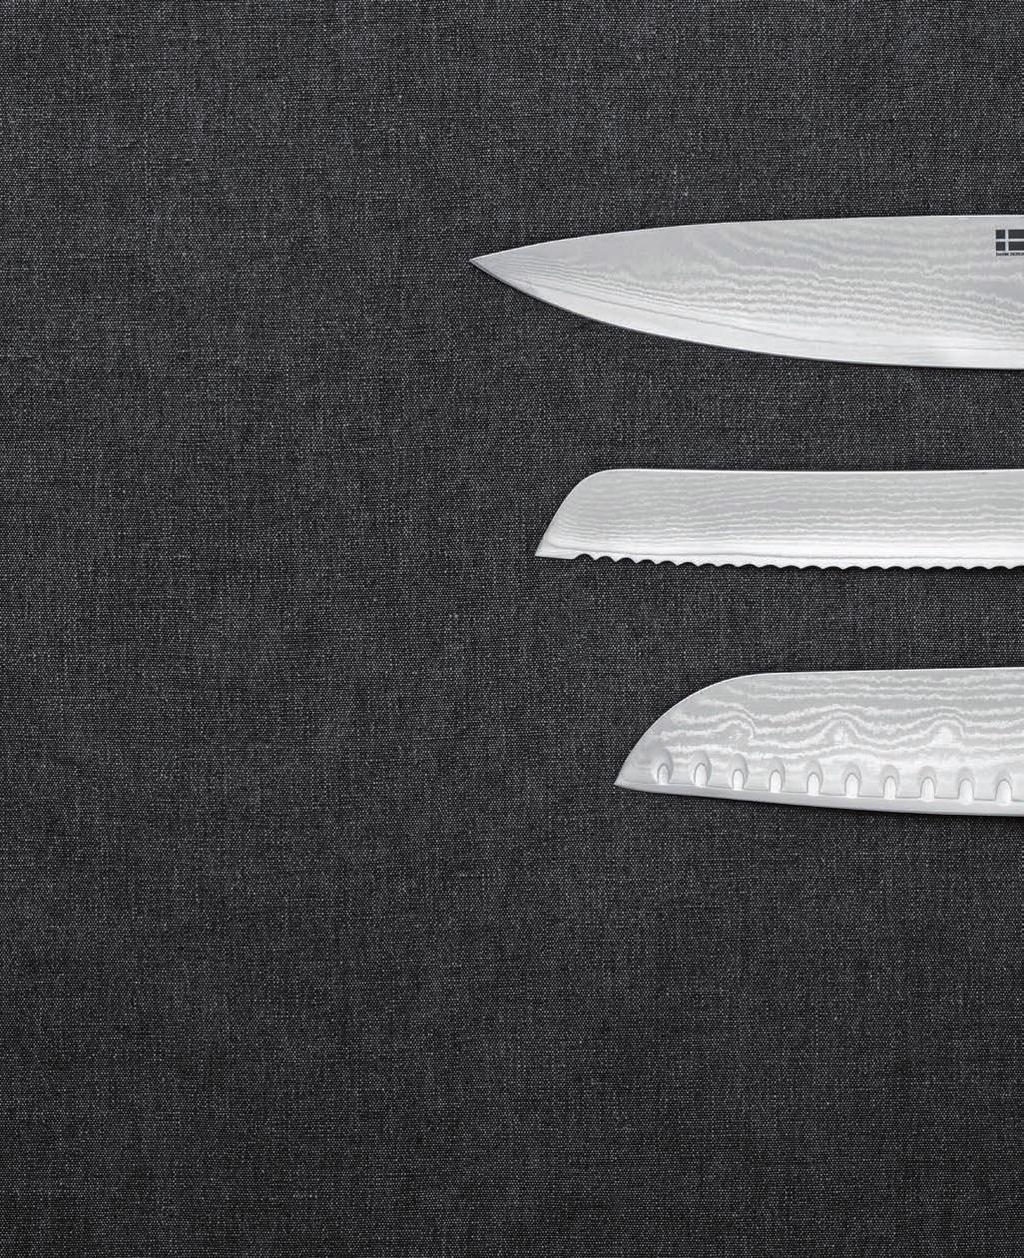 52 Damastahl is our exclusive series of luxury knives for the gourmet lover and passionate cook. The Damastahl series consists of elegant knives made from optimum quality.